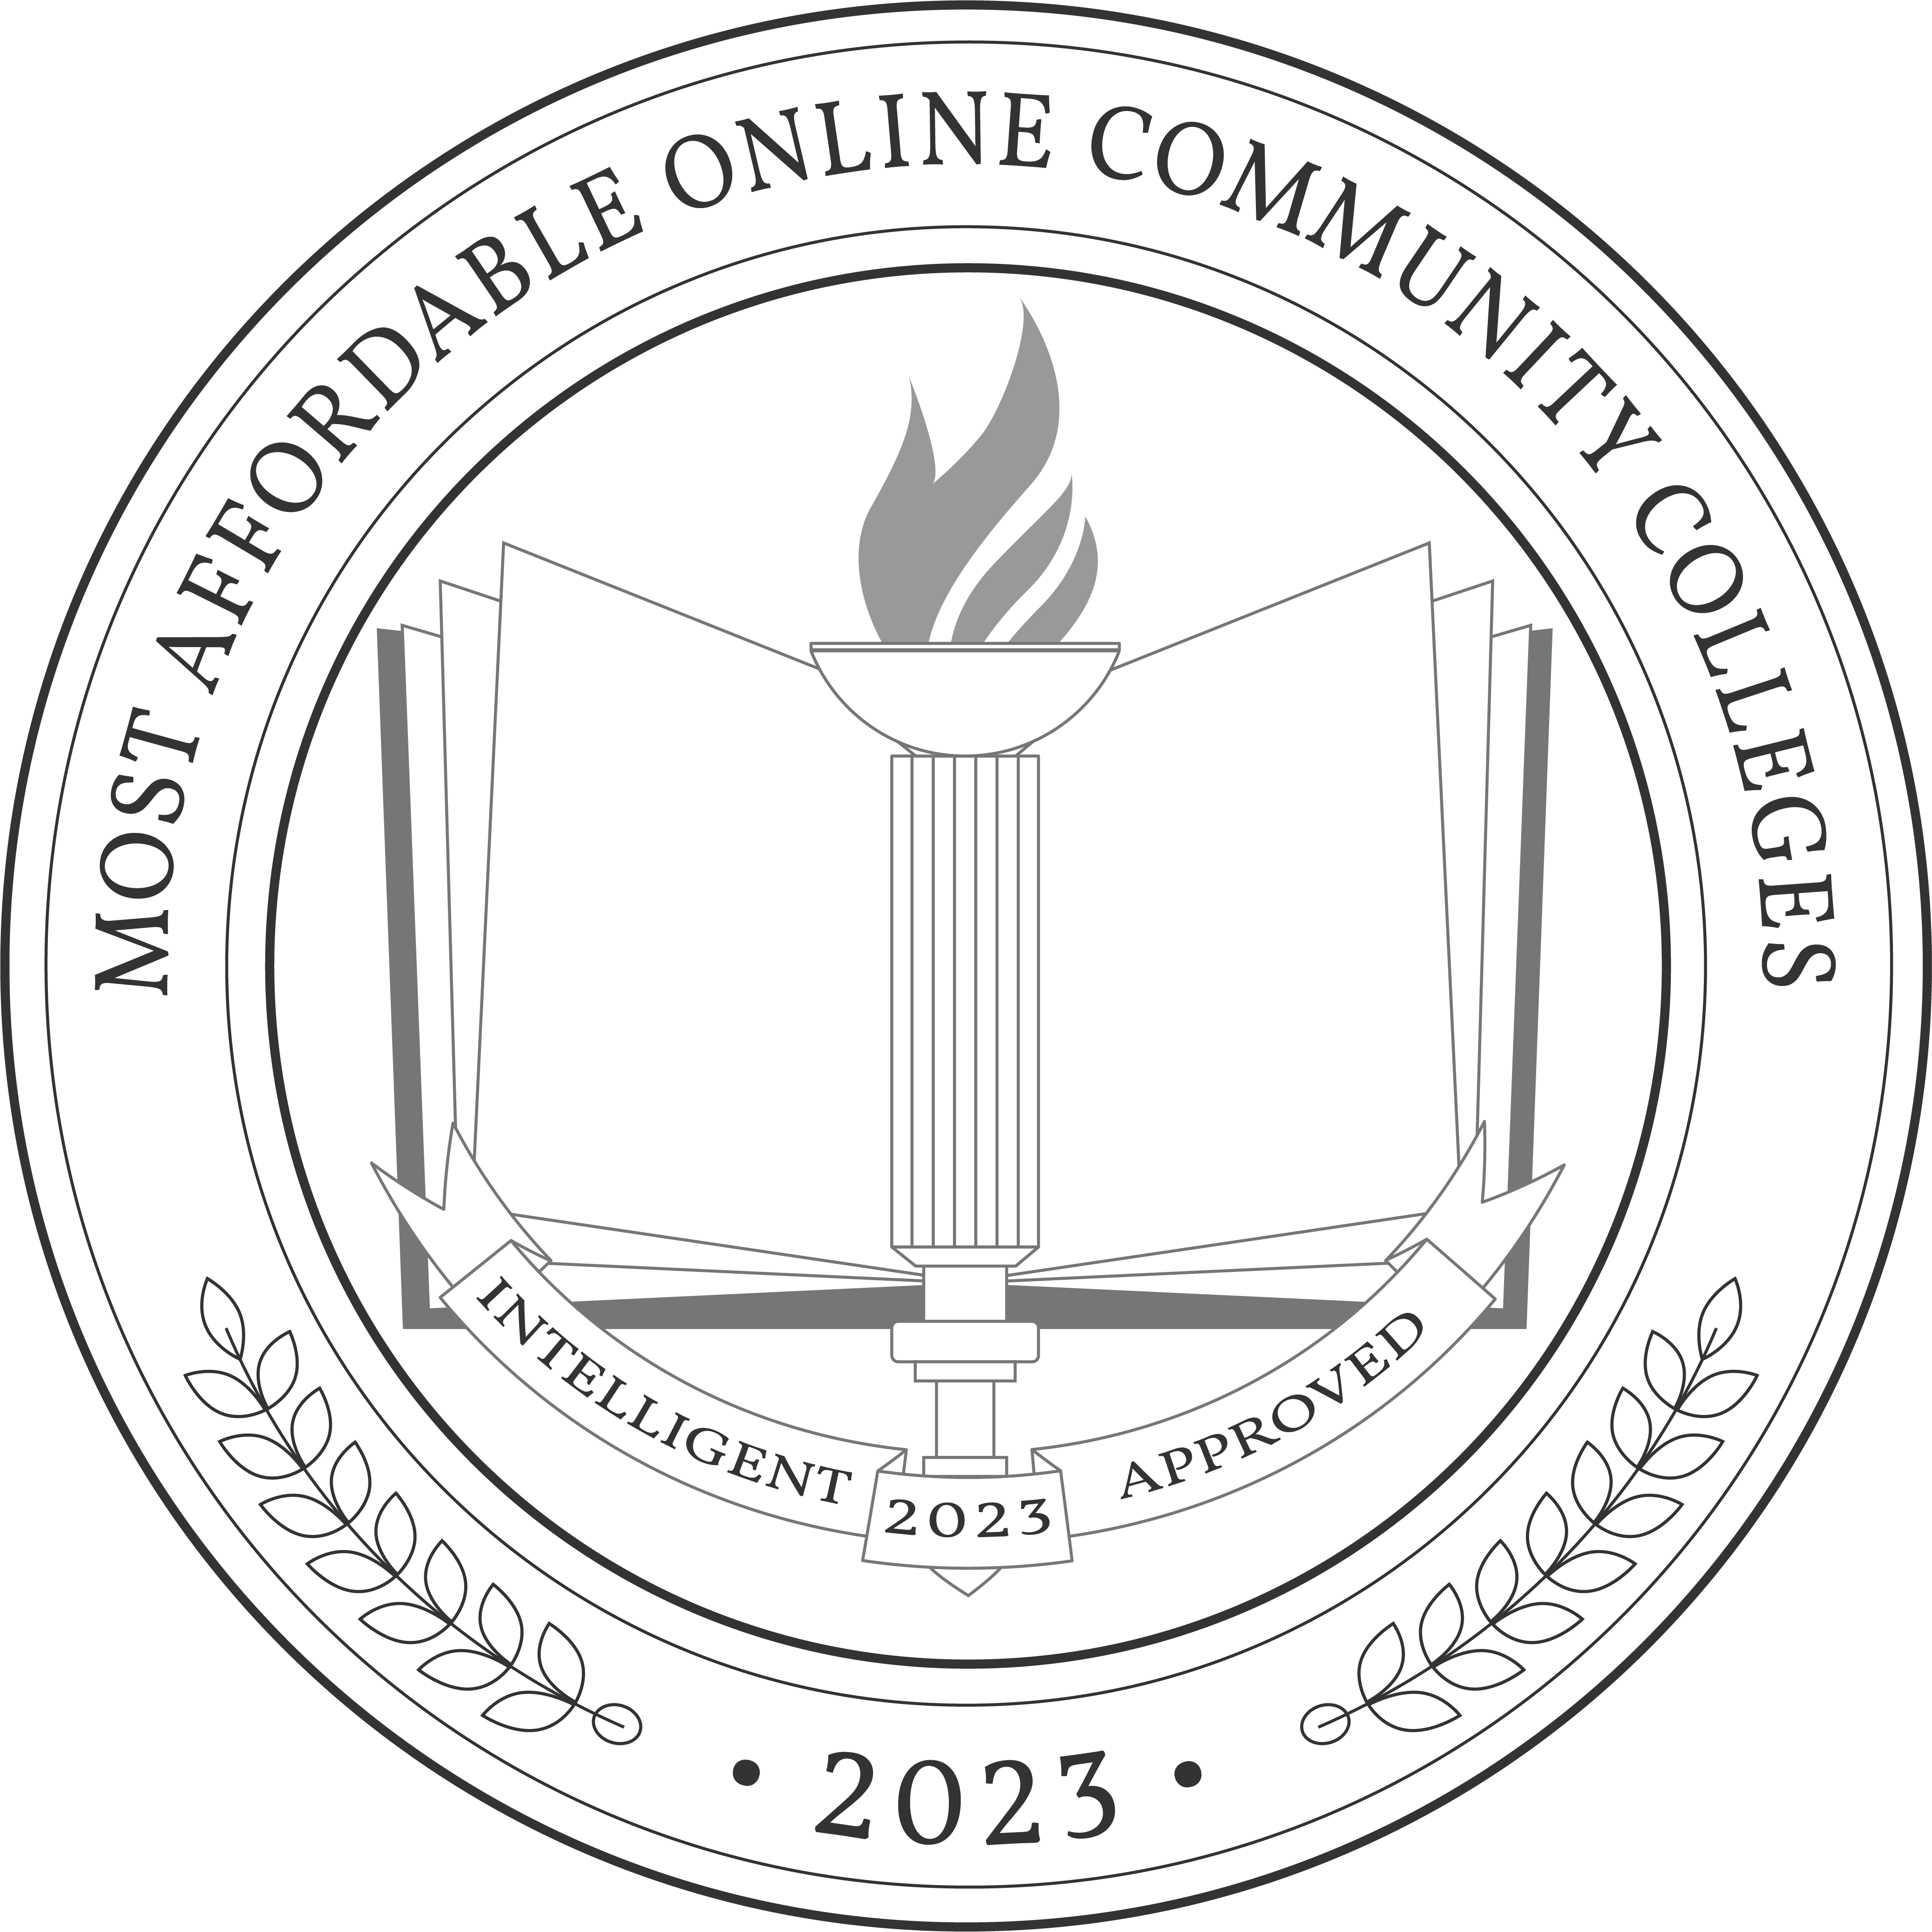 Most Affordable Online Community Colleges badge